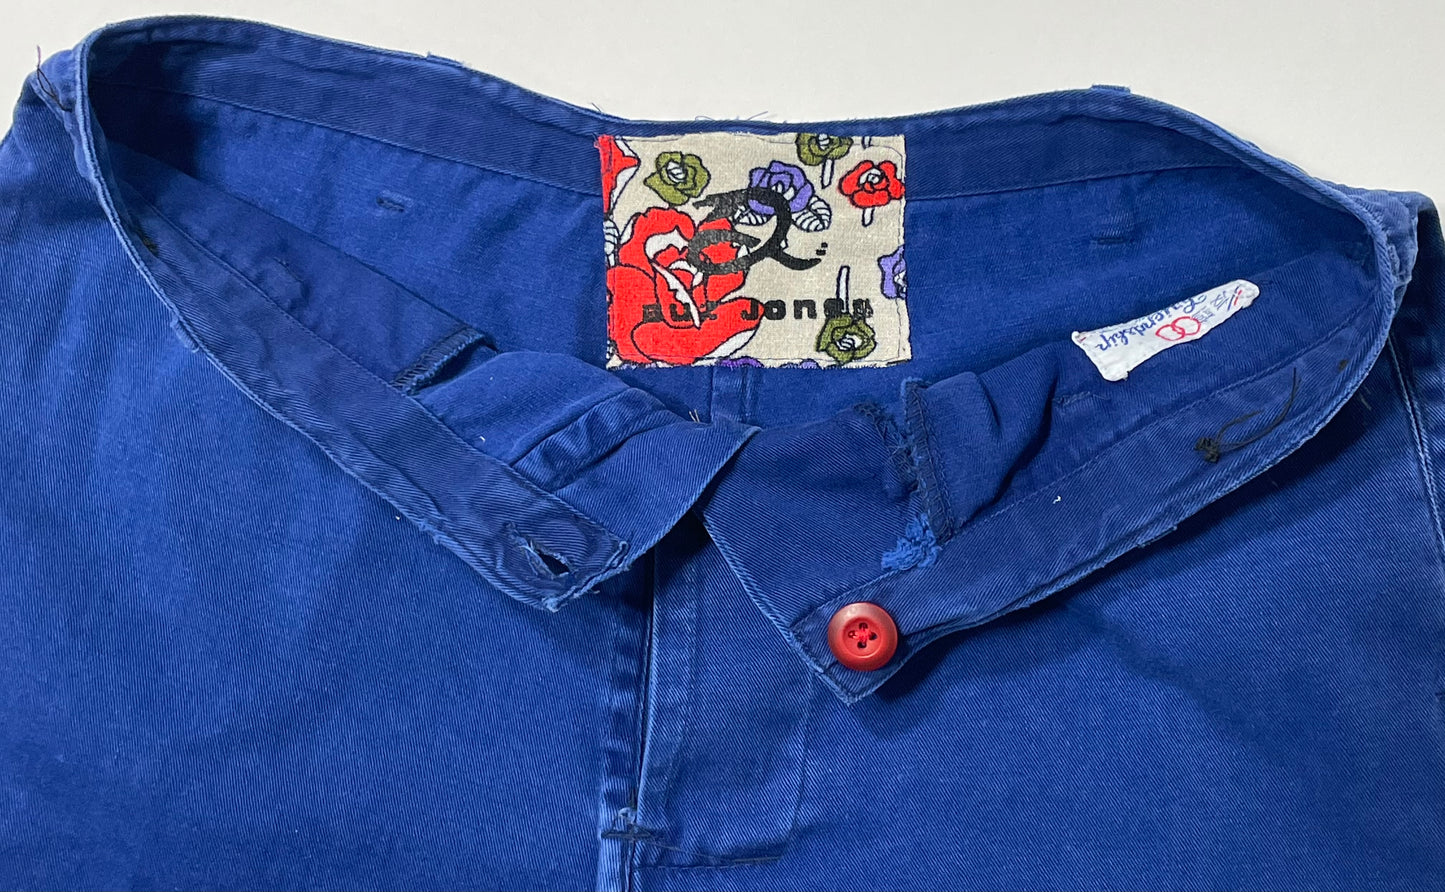 1950's 100% Cotton French Blue Workwear Pant